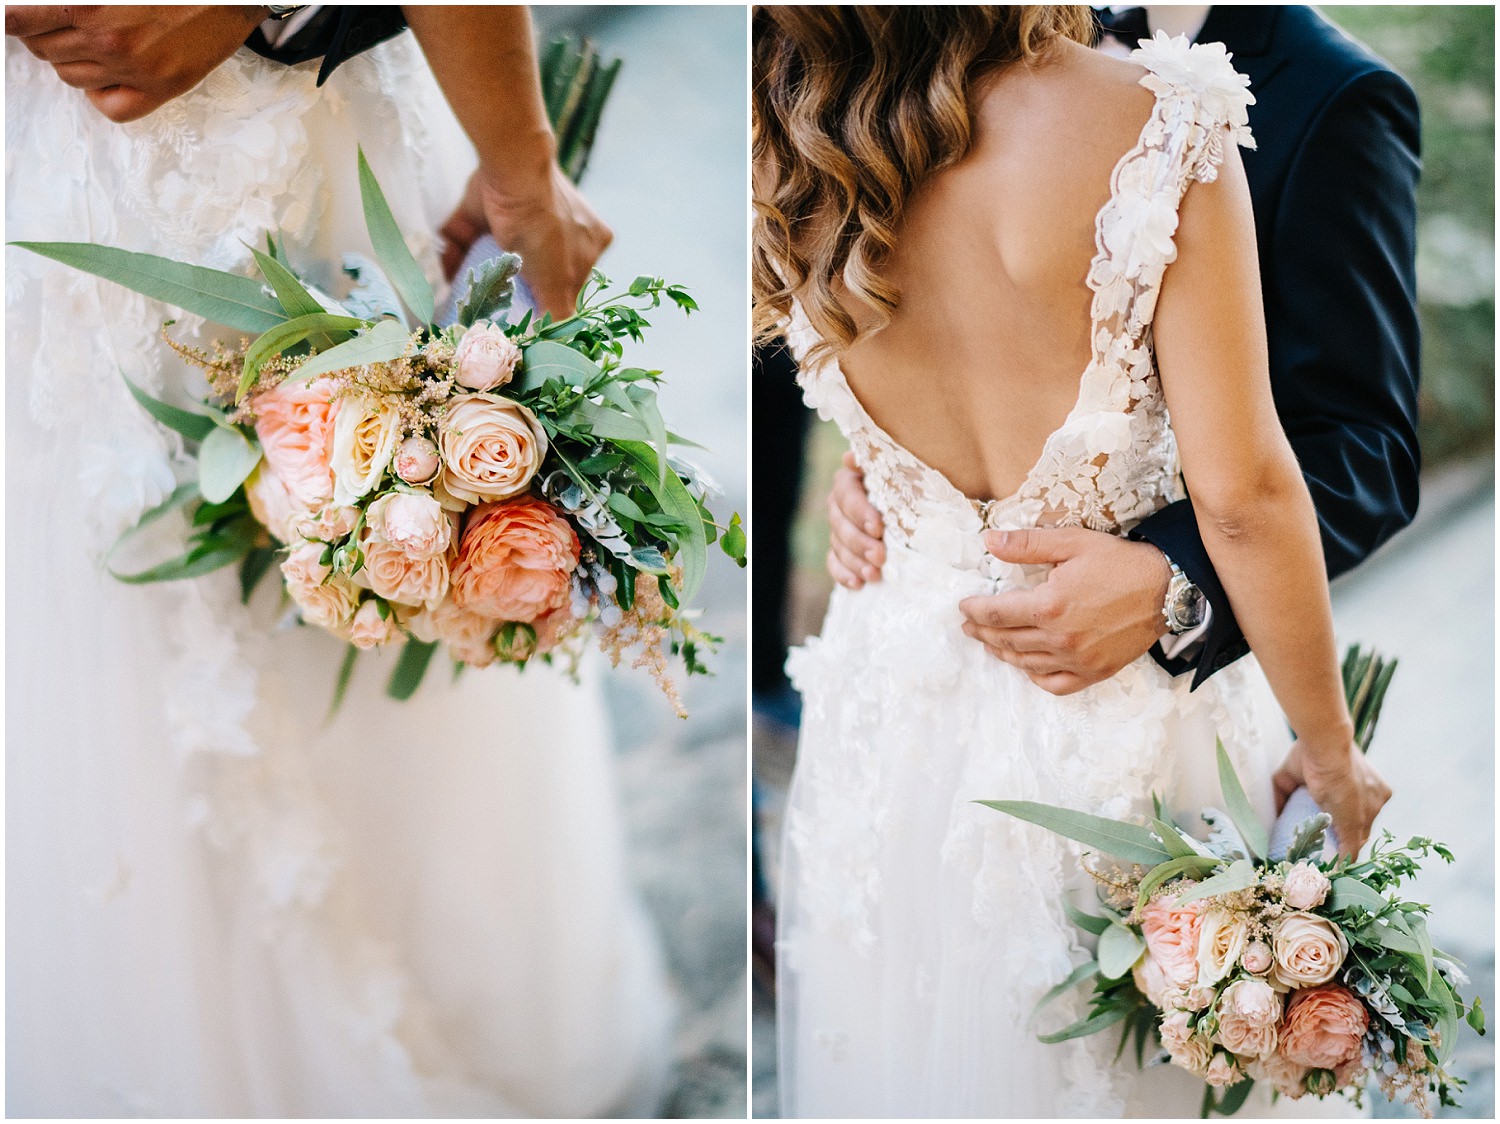 Romantic wedding with pink gold geometric details